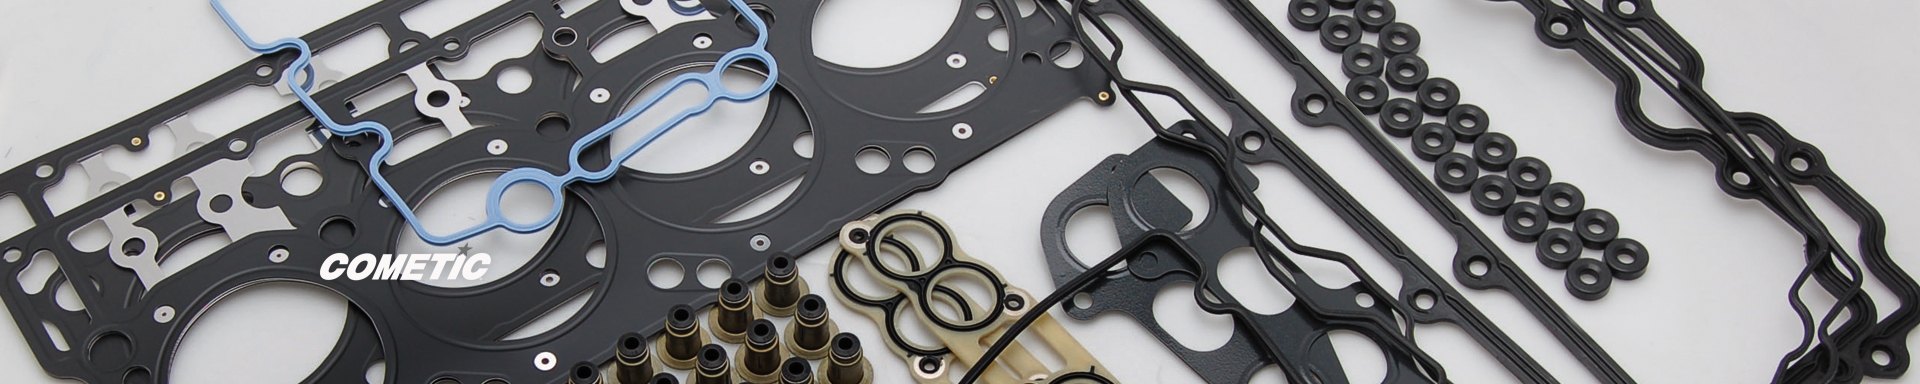 Cometic Gasket Racing Engines & Components